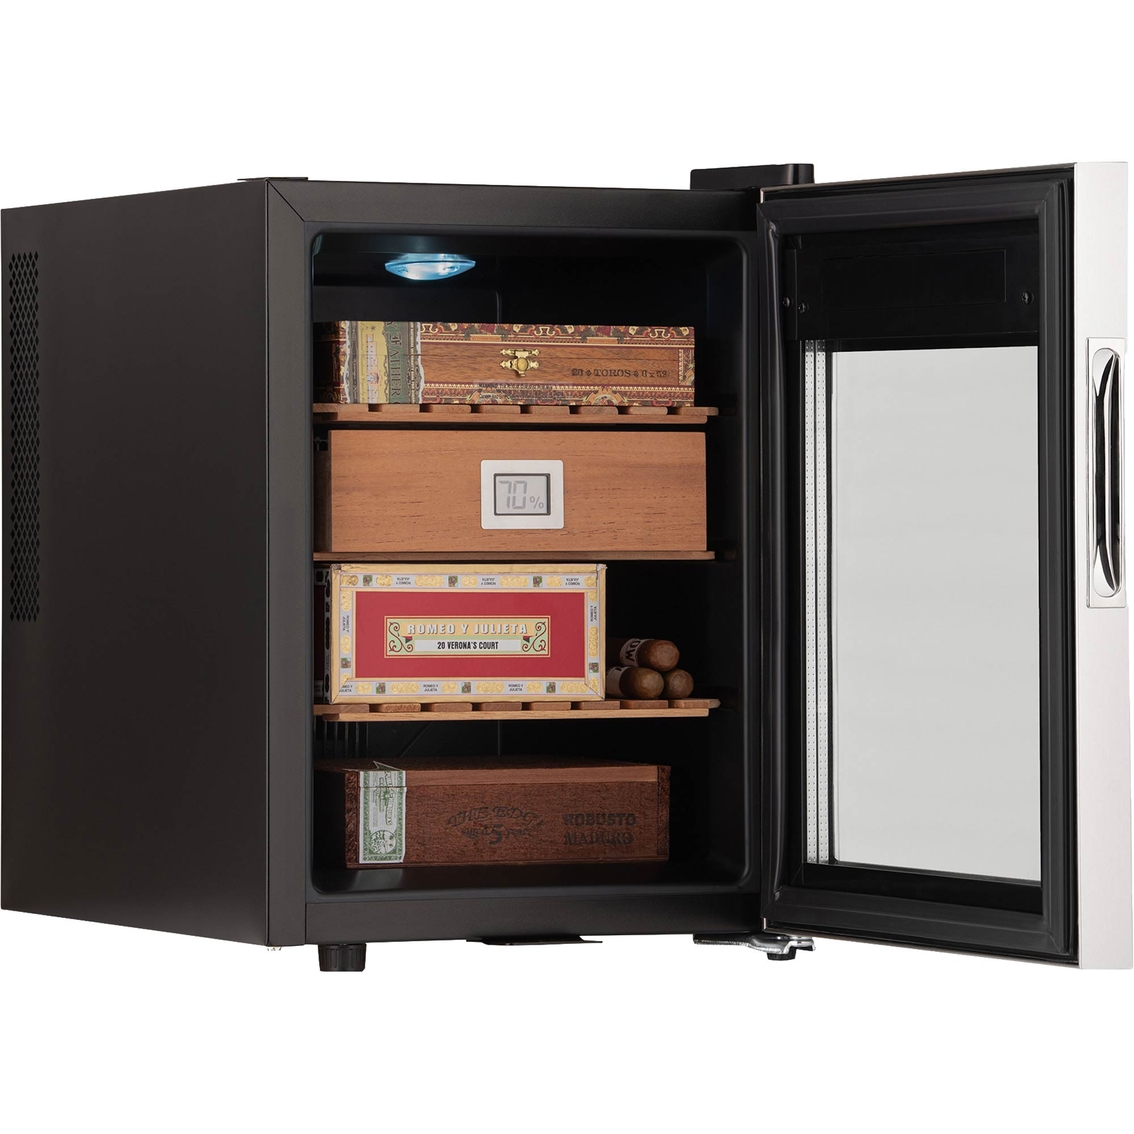 NewAir 250 Count Electric Cigar Humidor Wineador with OptiTemp - Image 4 of 9